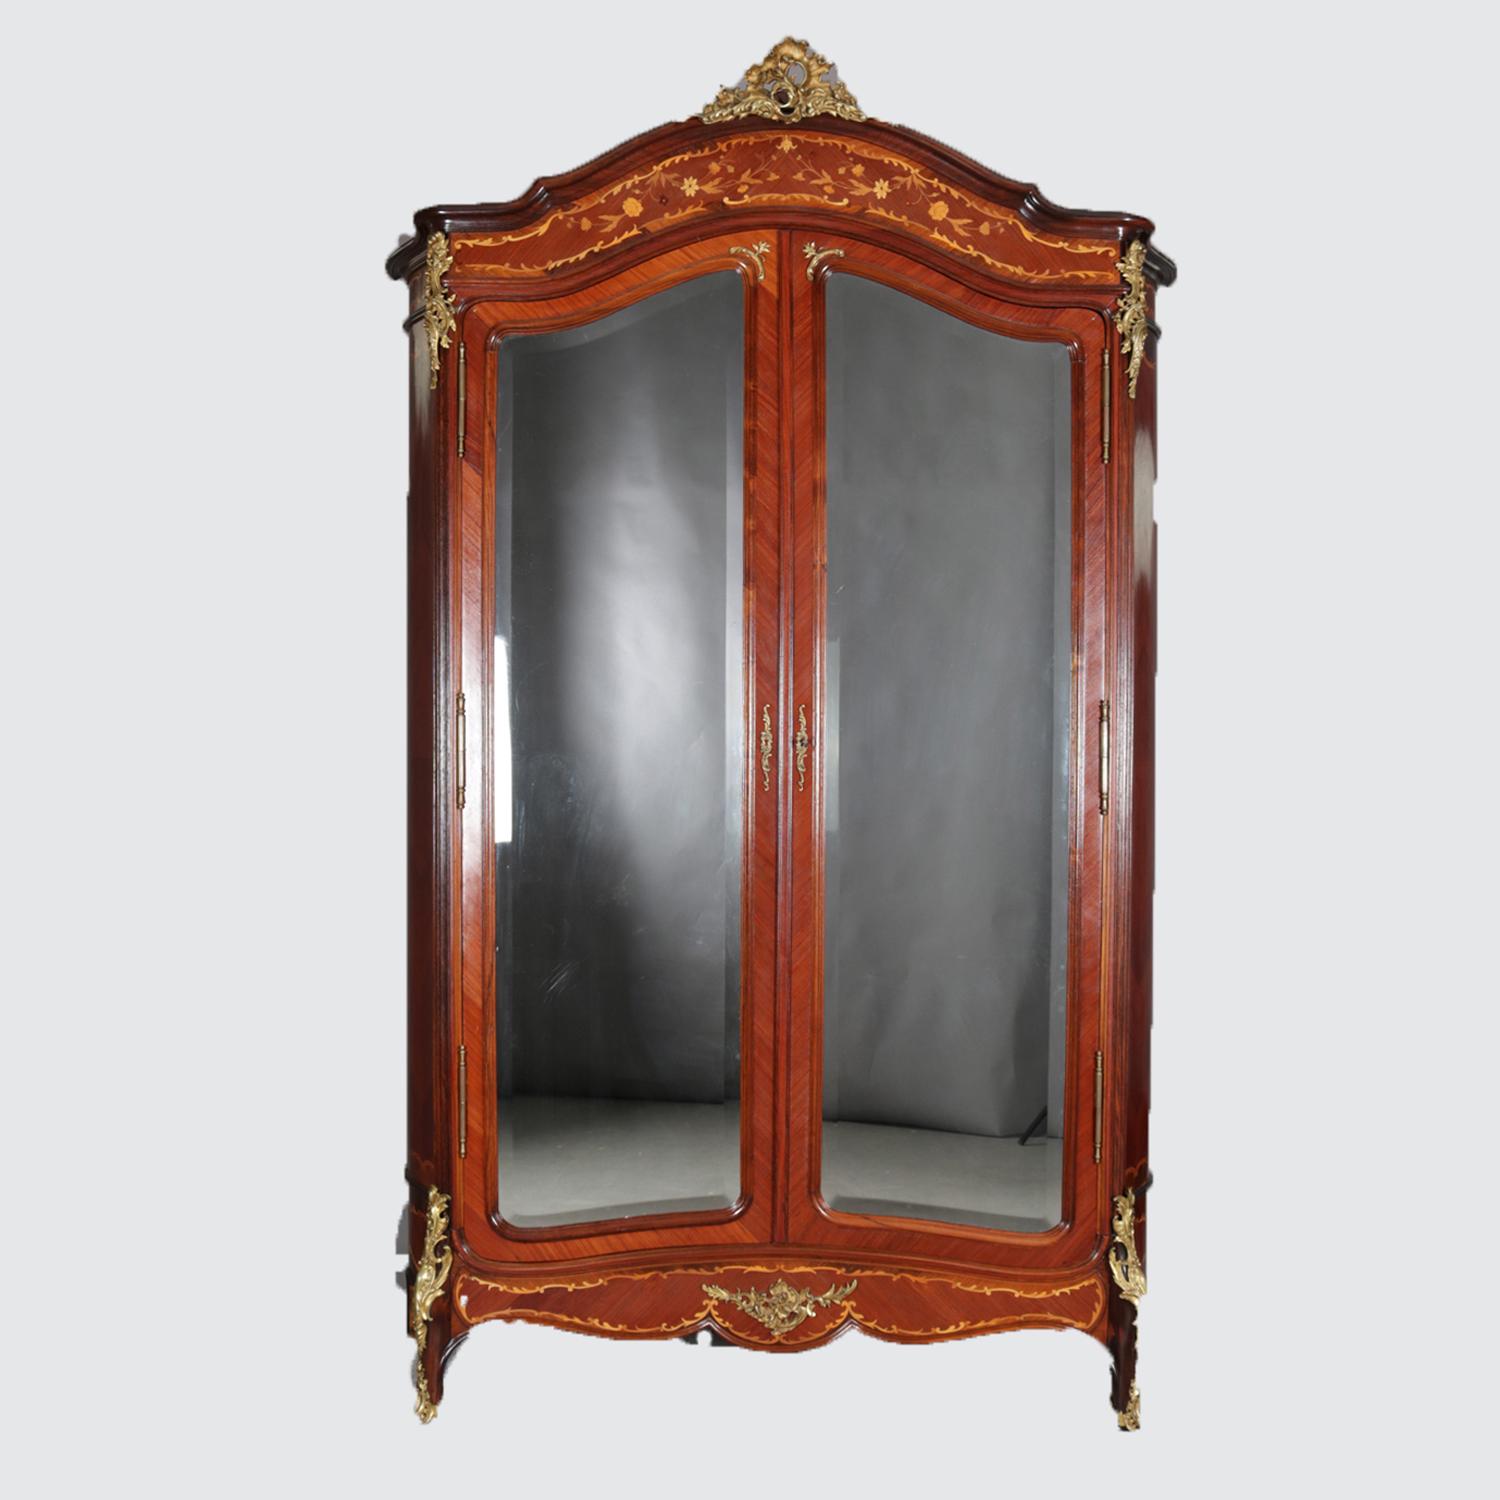 An antique French Louis XIV style mahogany armoire wardrobe features arched crest having foliate form ormolu finial and bookmatched fascia with satinwood inlaid foliate and floral decoration surmounting double doors with beveled mirrors opening to